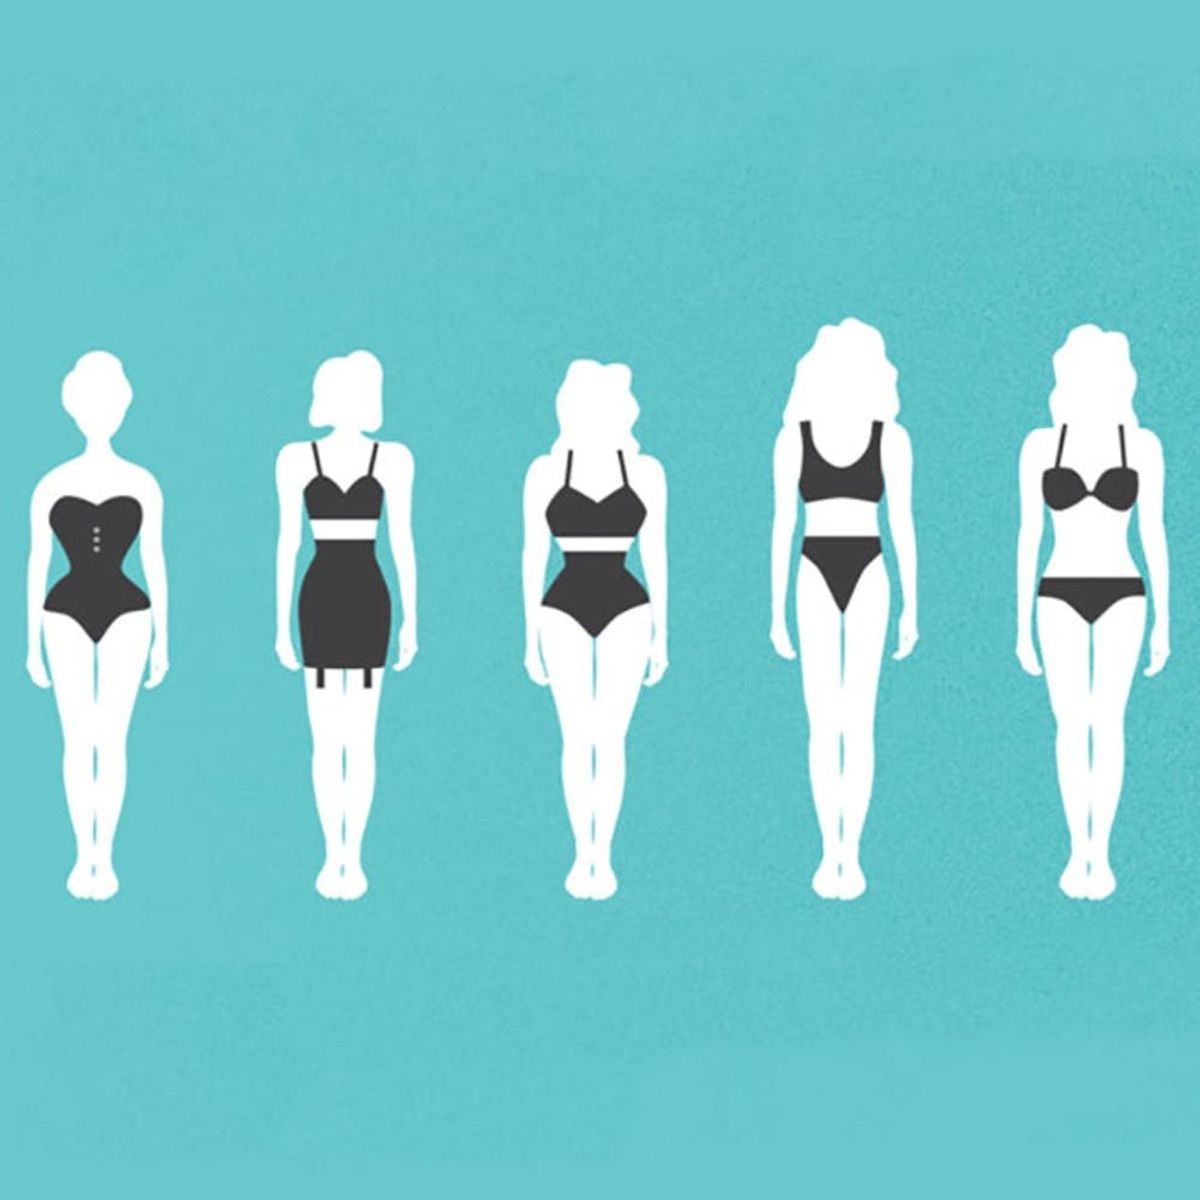 See How the “Perfect Female Body” Has Changed in 100 Years